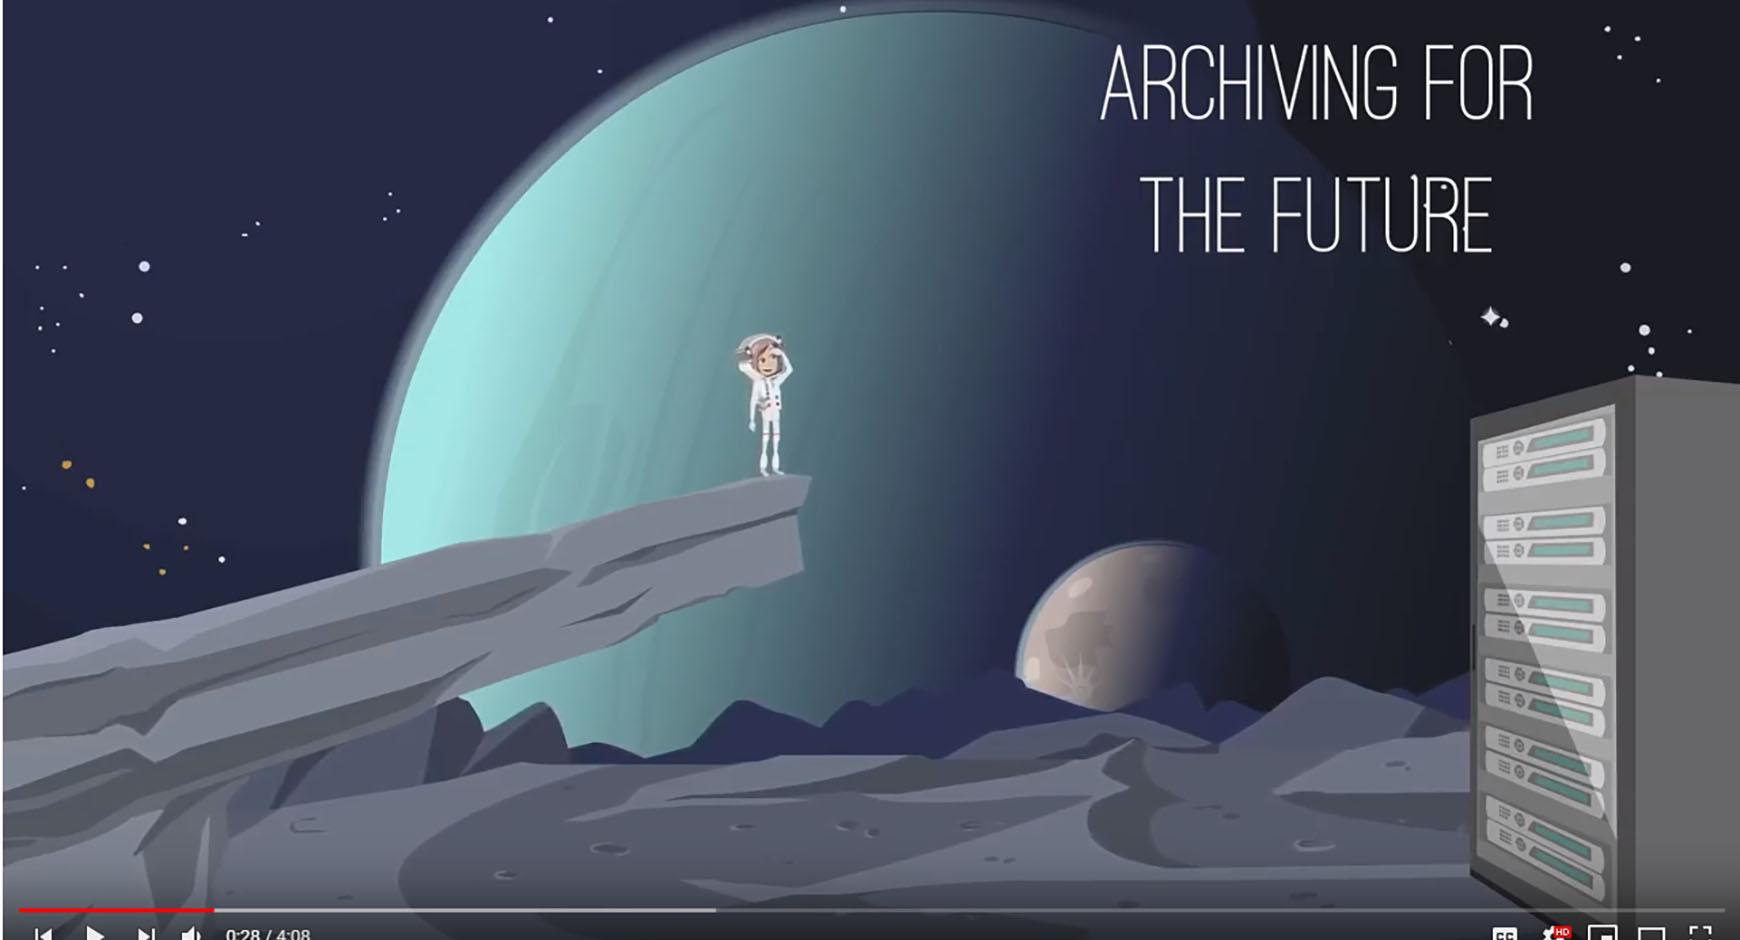 The image is a video screenshot of animated astronaut on moonscape. The words "Archiving for the Future" are printed in the upper right corner.